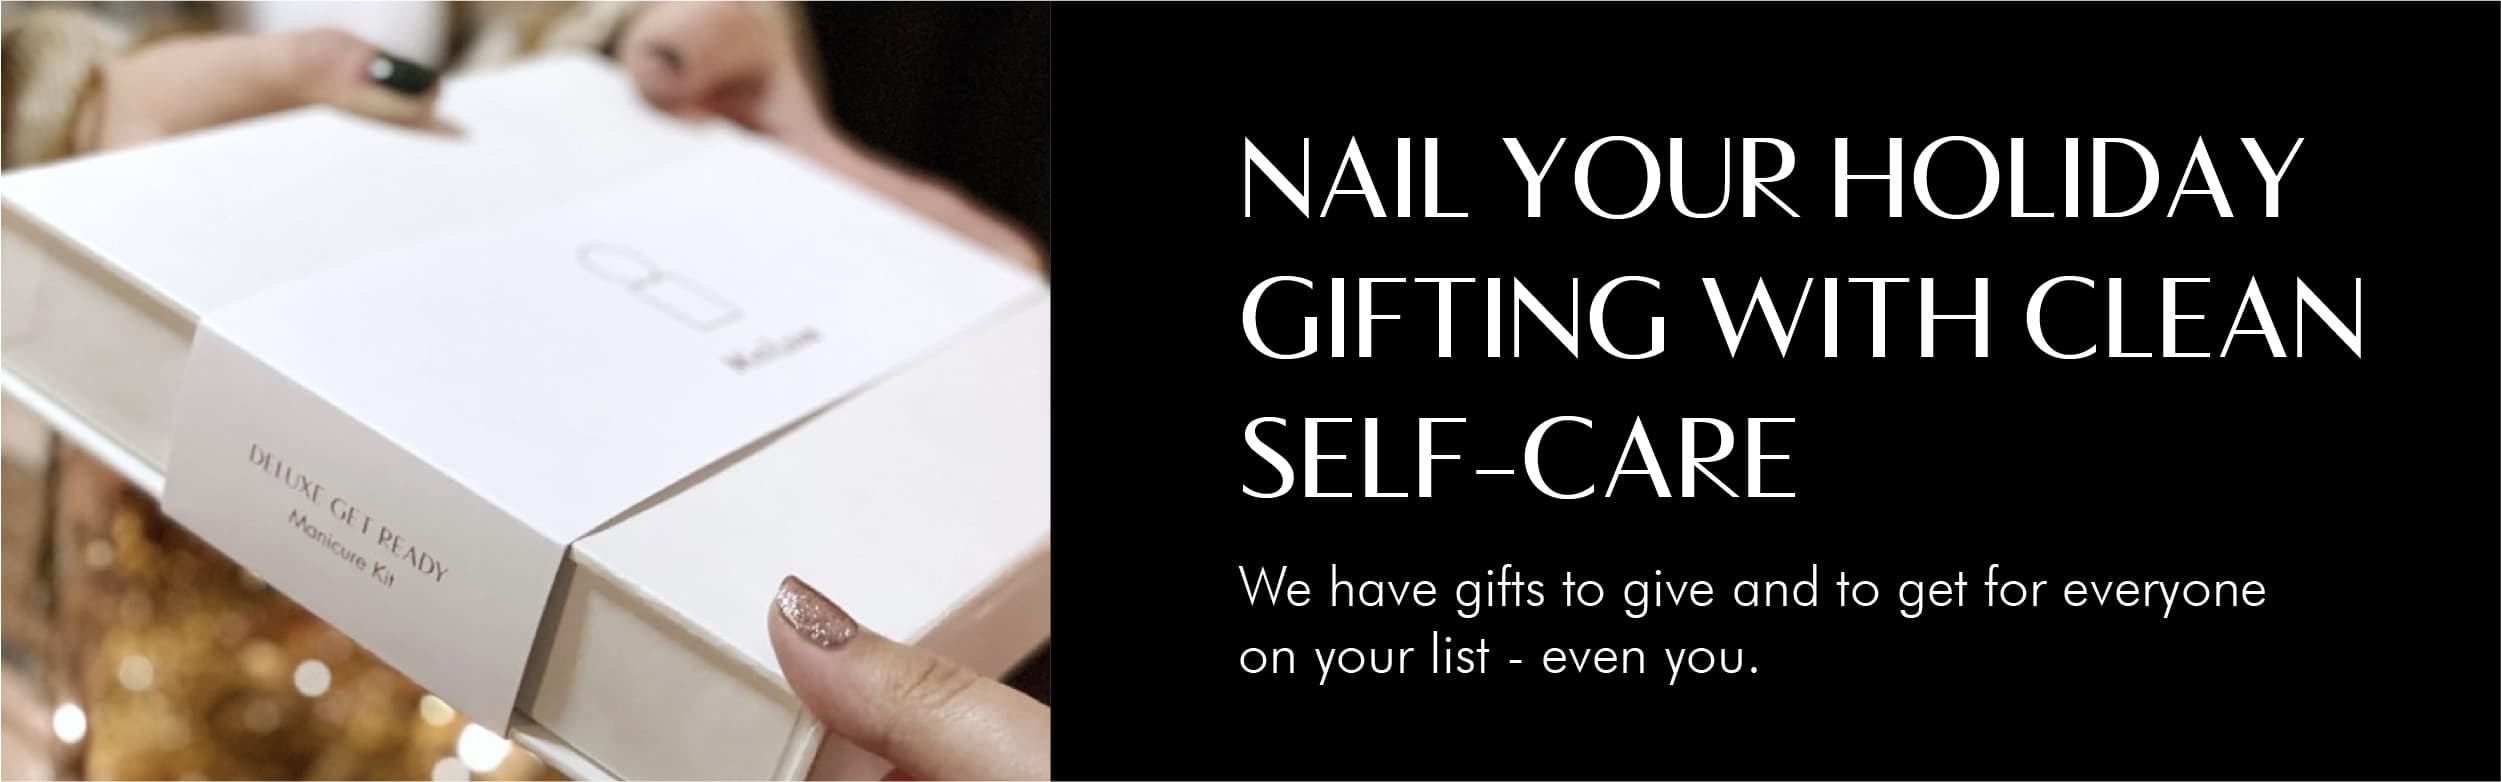 Nail your holiday gifting with clean self-care.